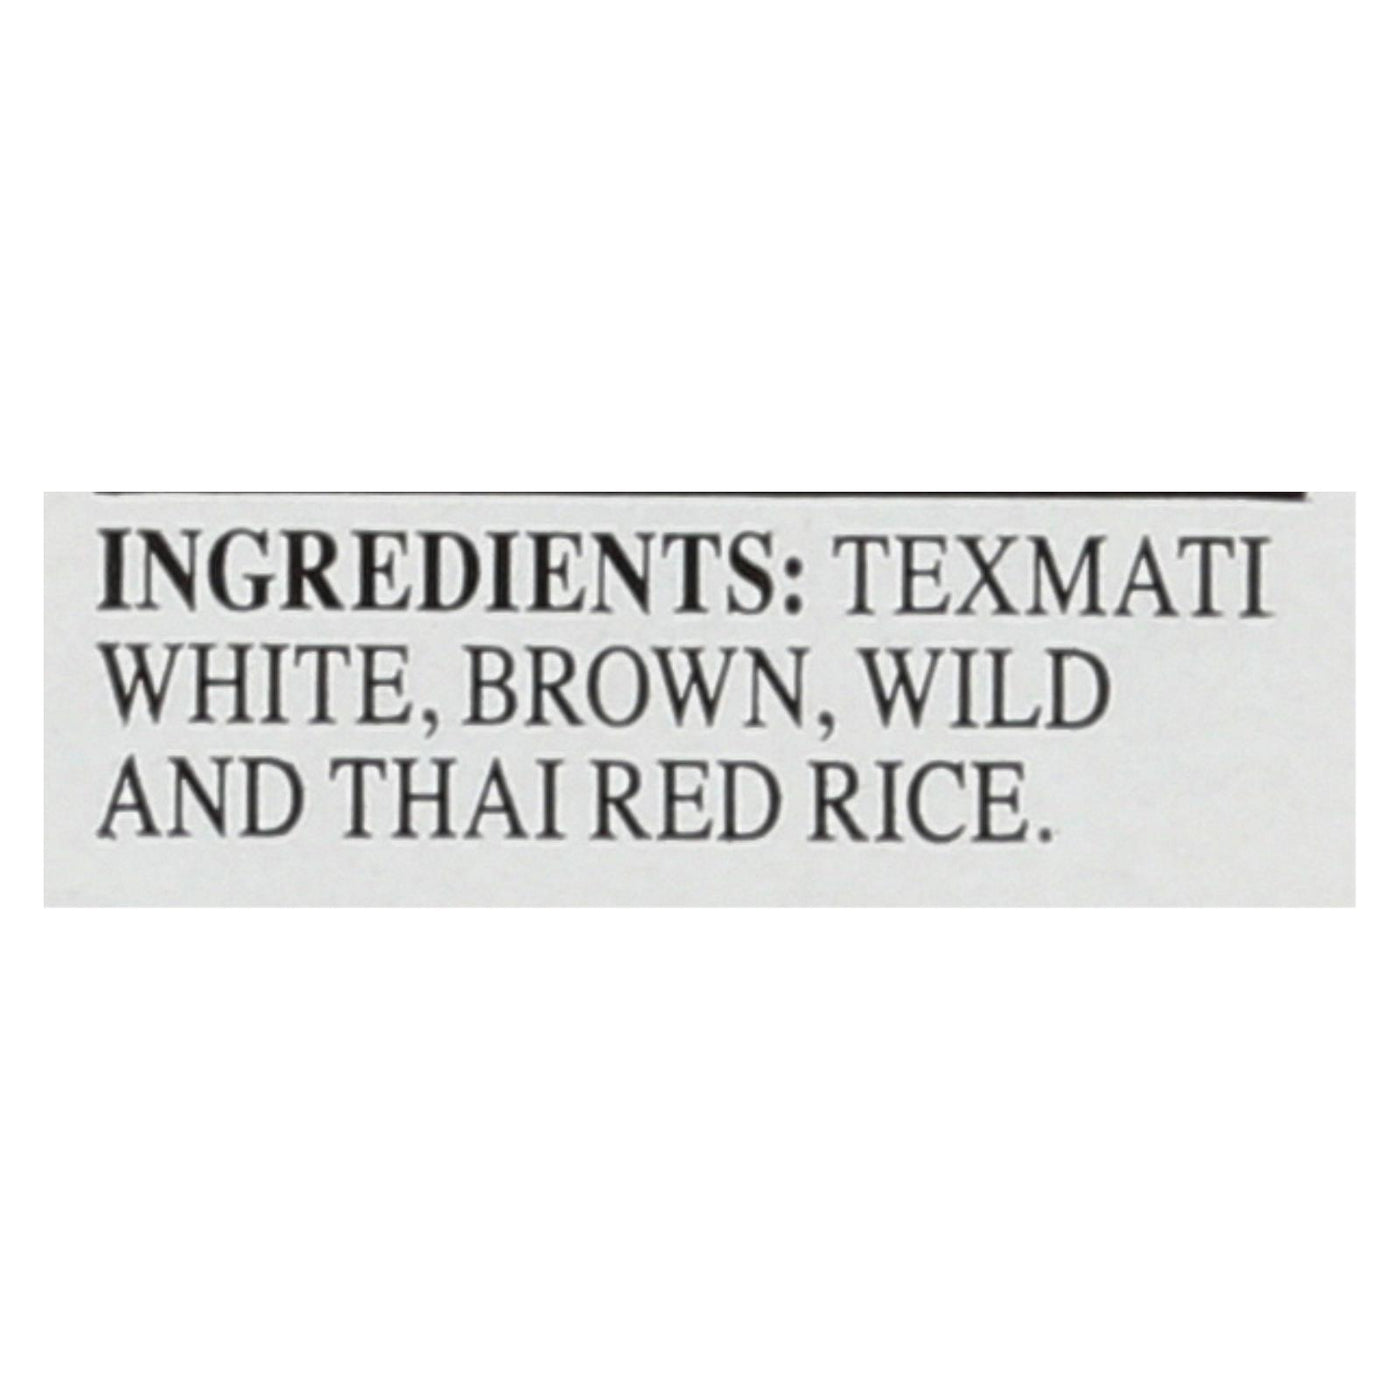 Rice Select Royal Blend - White Brown And Red - Case Of 4 - 21 Oz. | OnlyNaturals.us